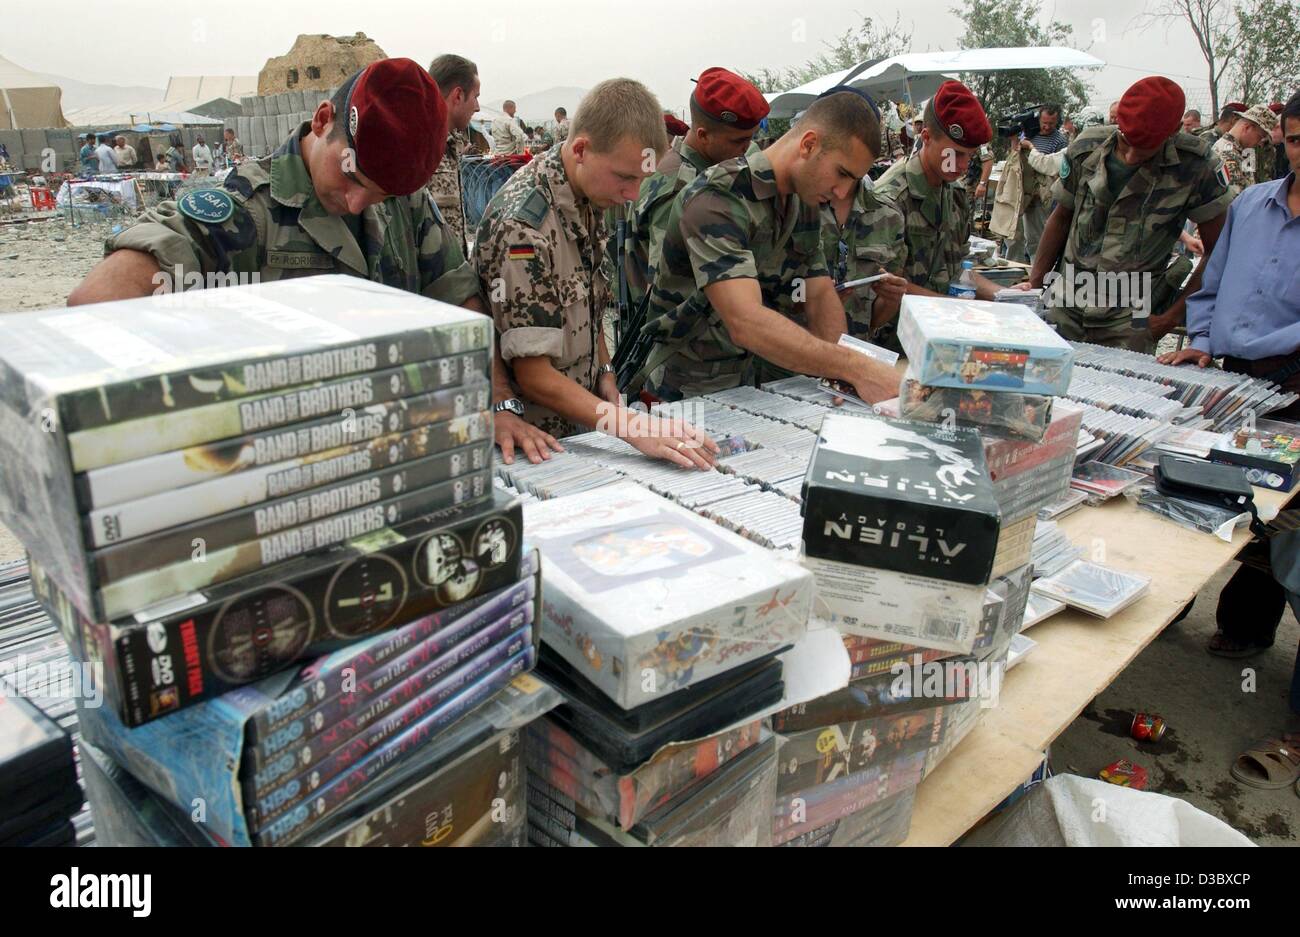 (dpa) - German soldiers look, in their spare time, through stacks of dvds, cds and other merchandise at the stands of street traders in Kabul, Afghanistan, 3 August 2003. Germany continues to participate with more than 1,500 soldiers in the International Securtiy Assistance Force (ISAF) which consis Stock Photo